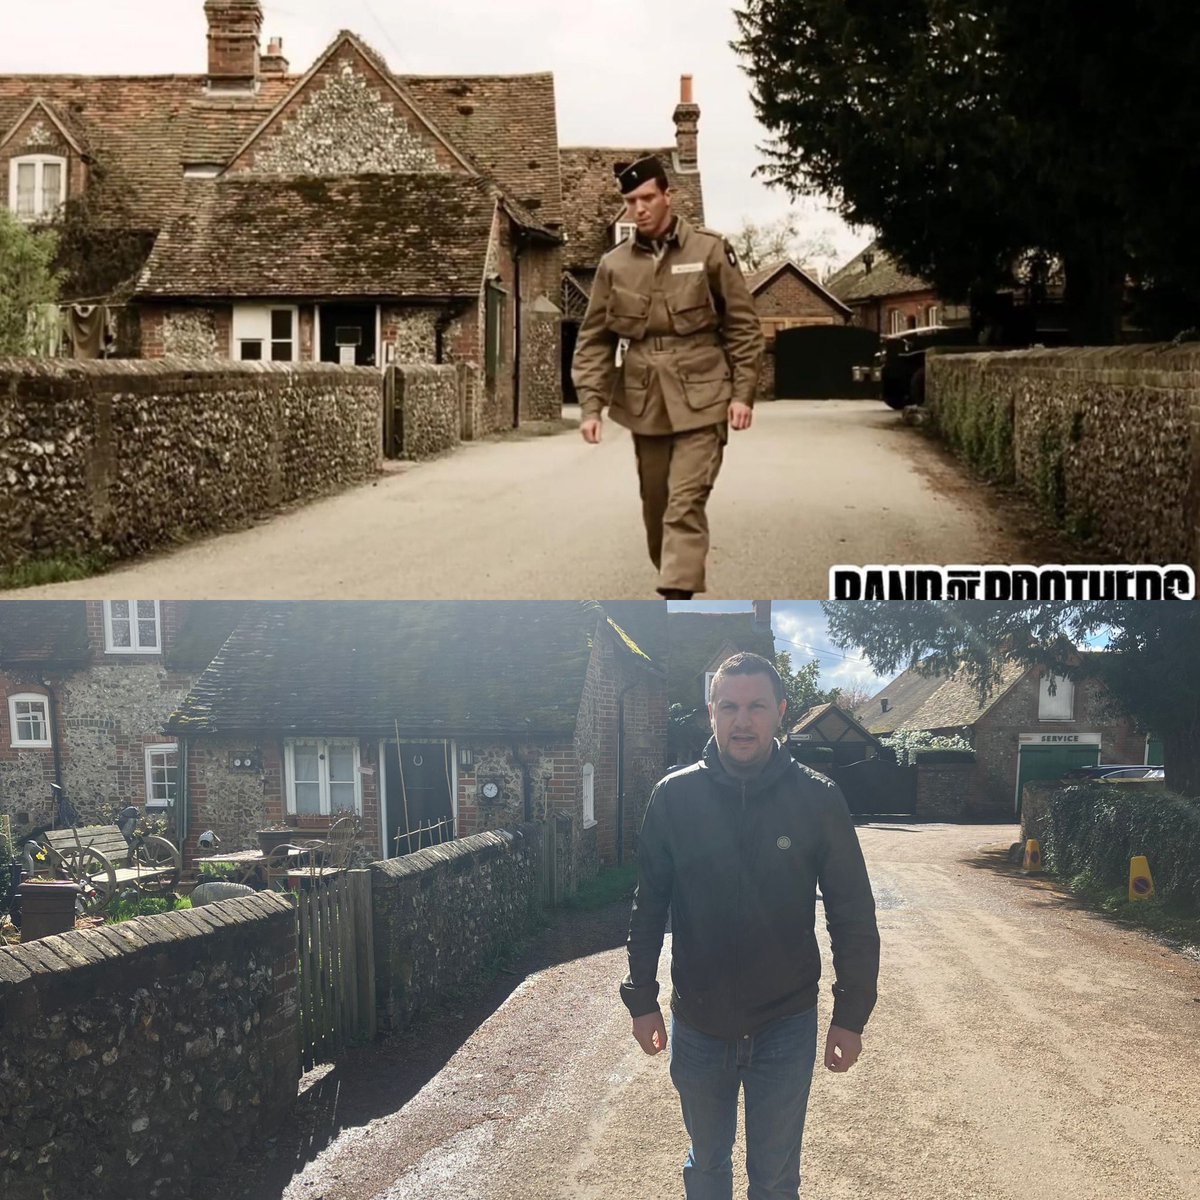 Band of Brothers village of Hambleden #currahee #506 #bandofbrothers